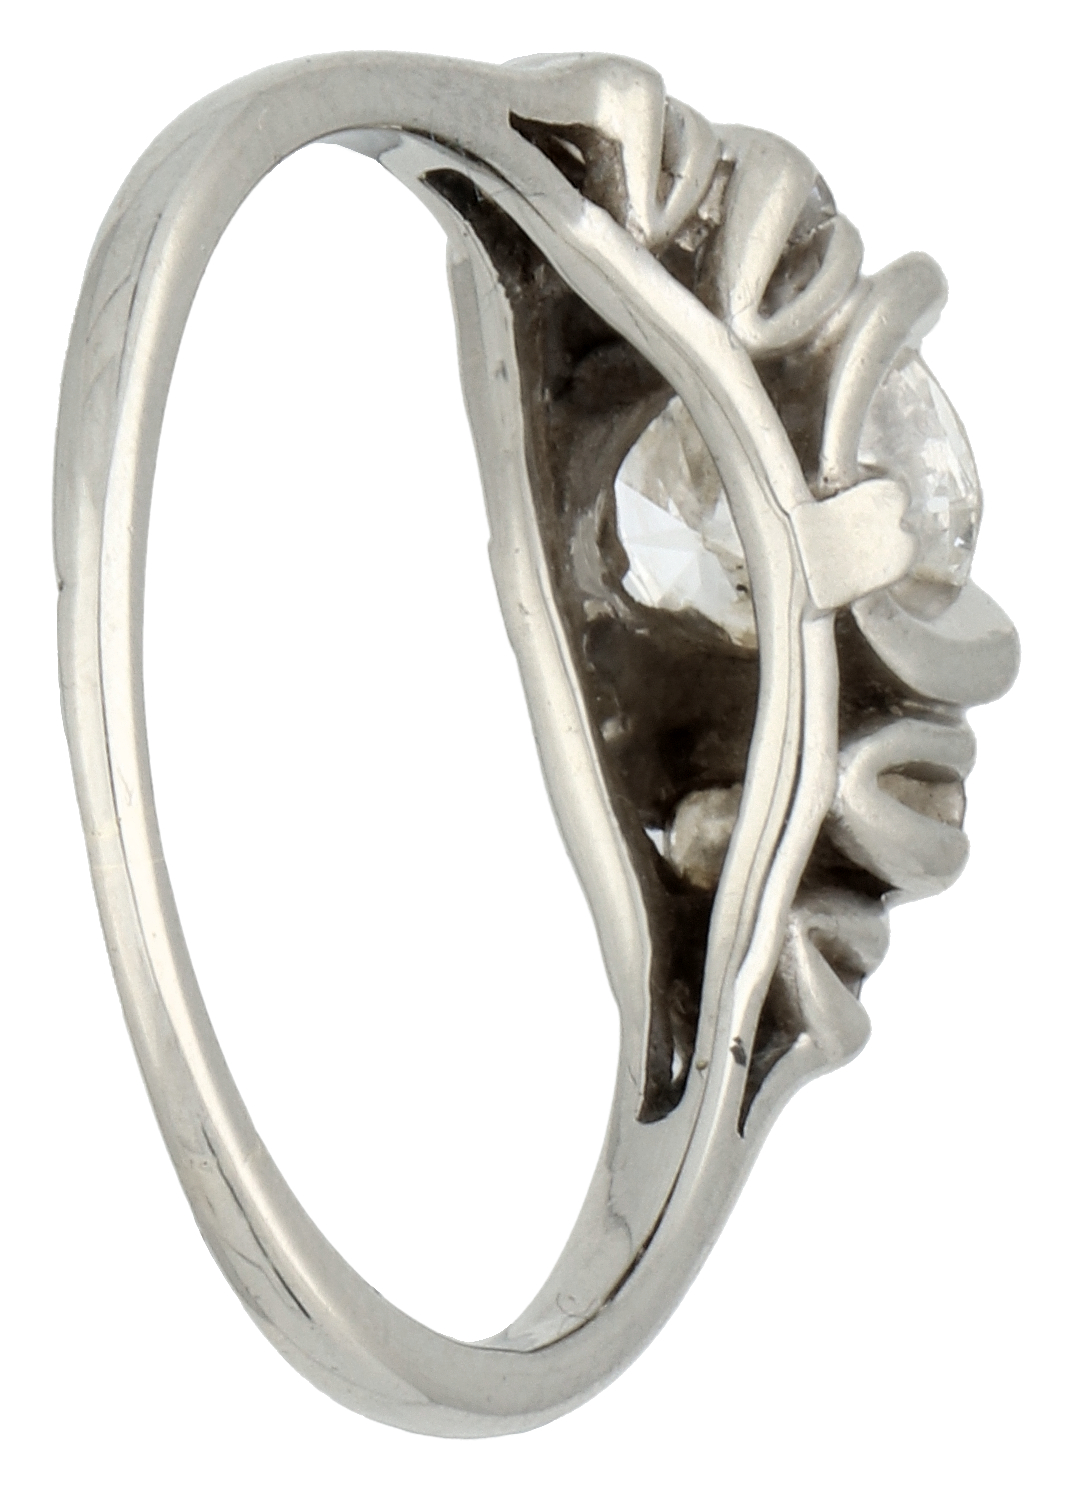 No Reserve - 18K White gold Art Deco ring set with approx. 1.02 ct. diamond. - Image 2 of 4